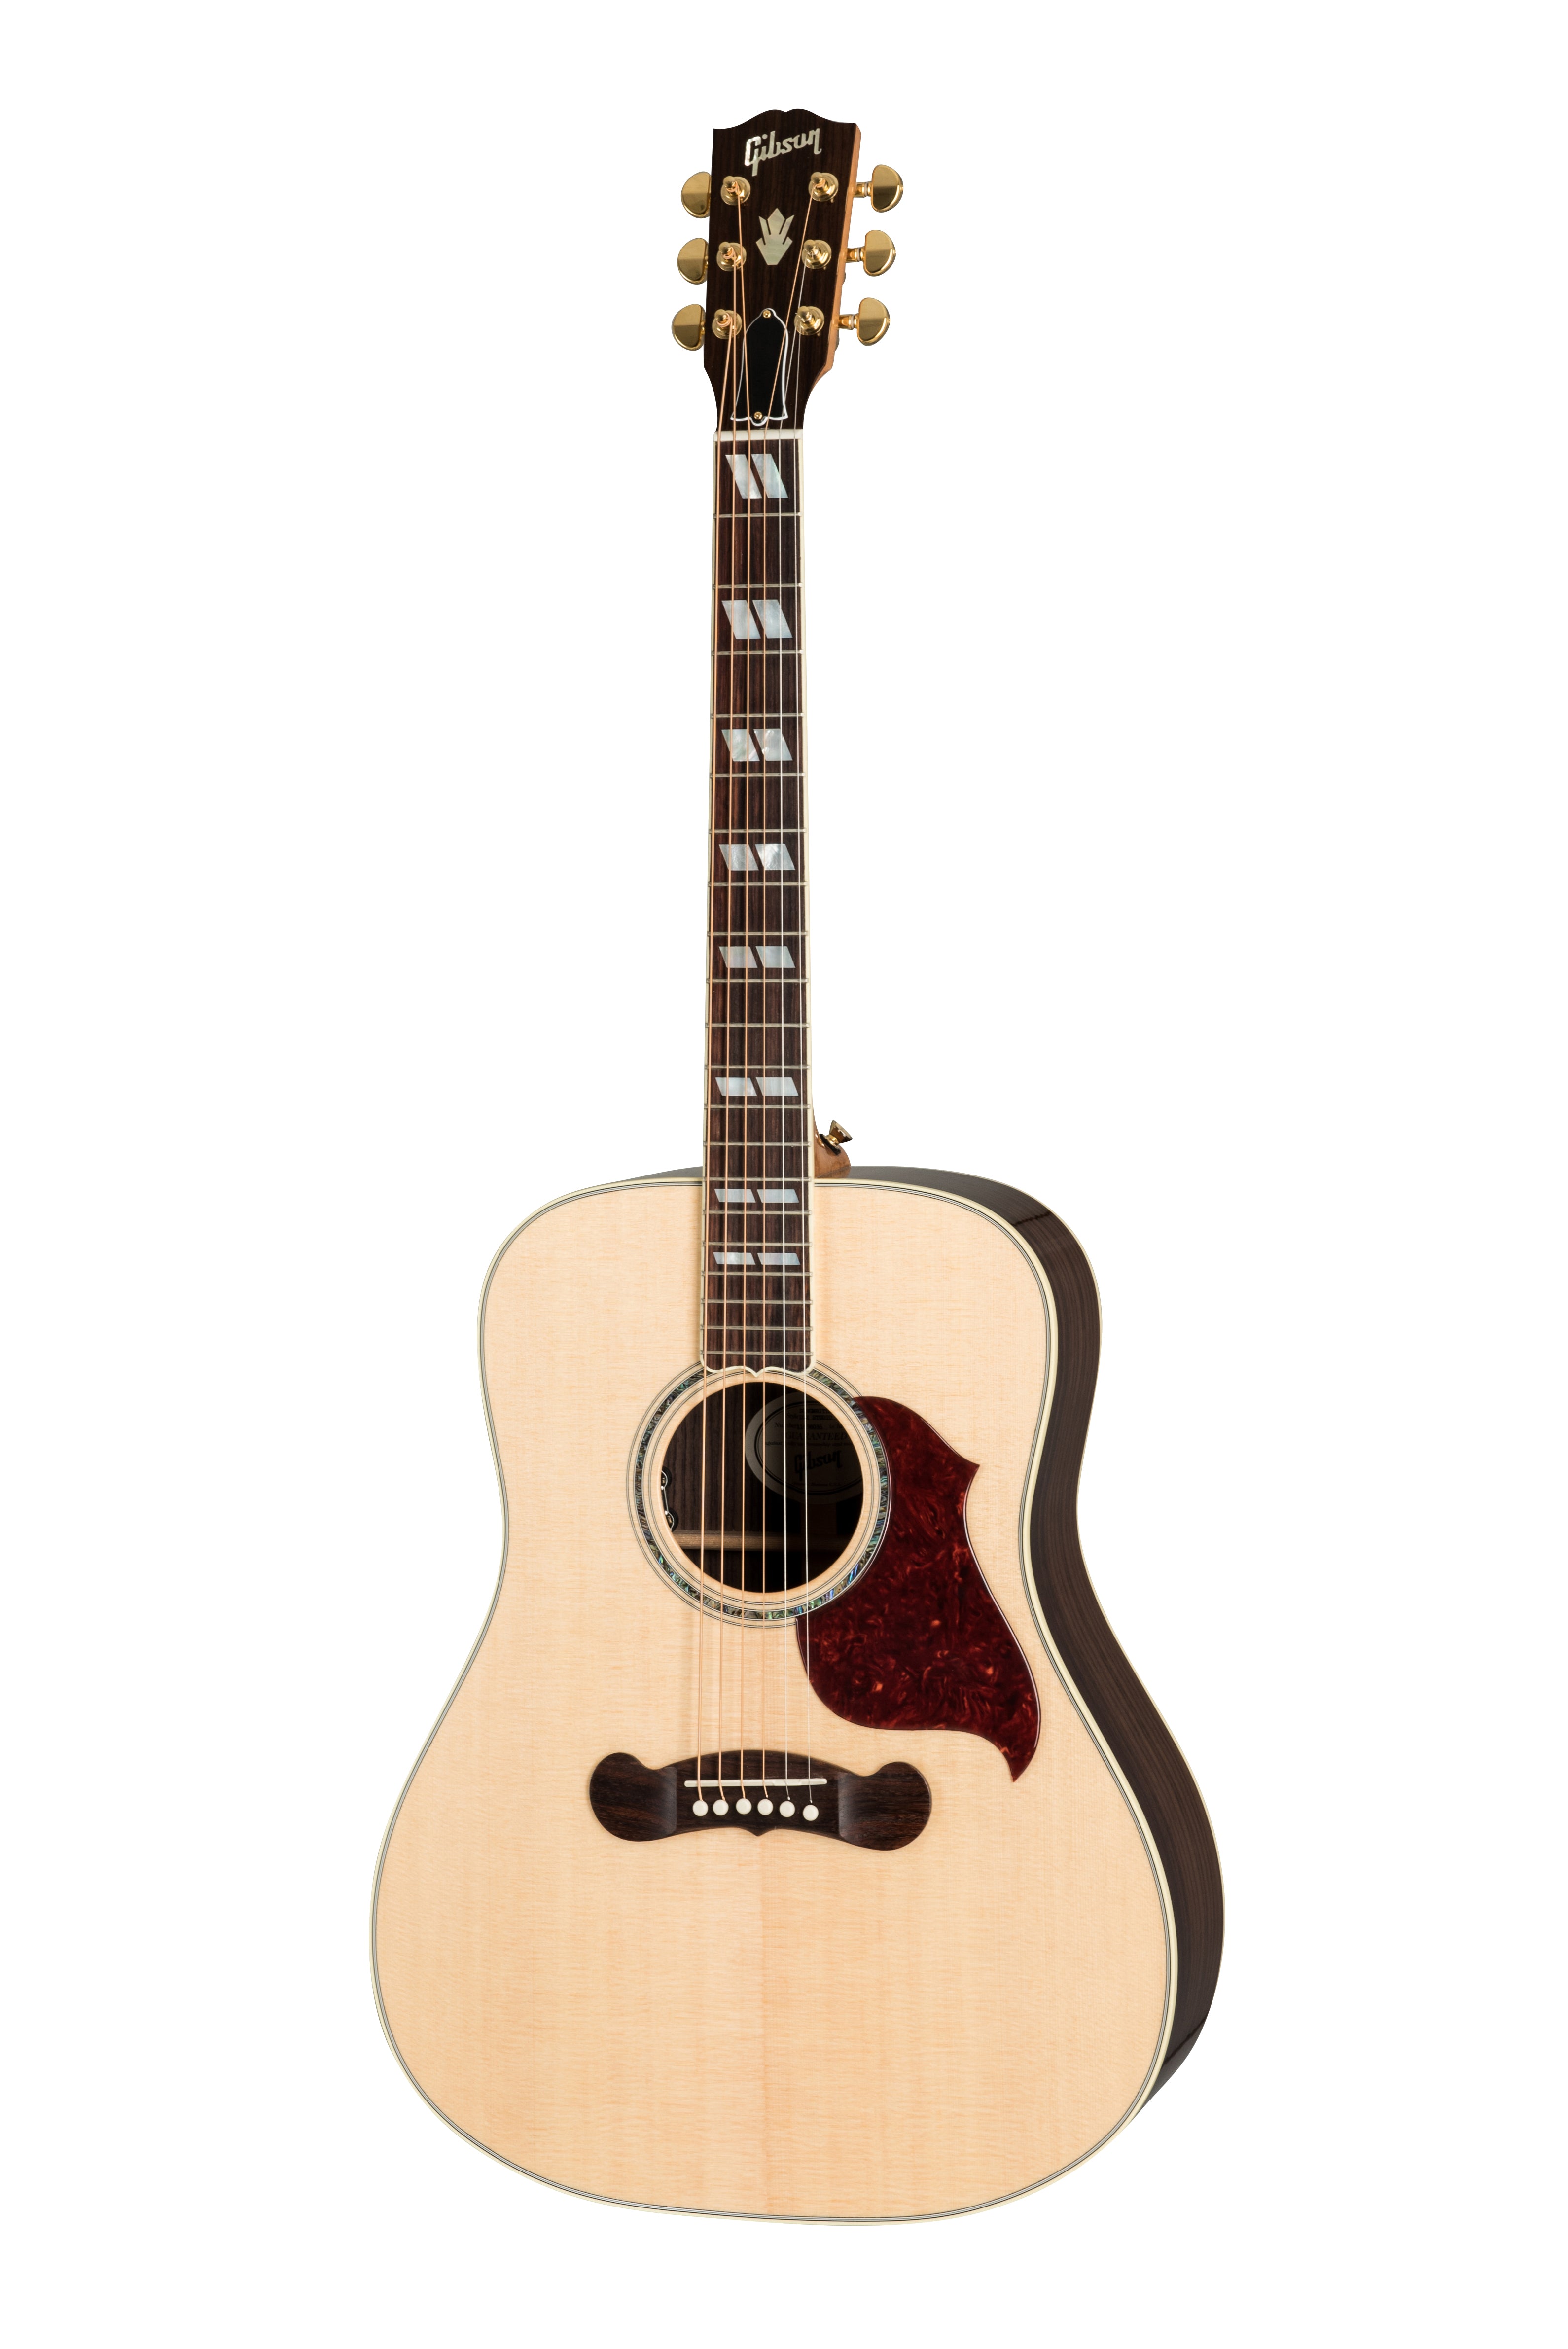 Gibson Songwriter Standard Rosewood Acoustic Guitar,  Antique Natural